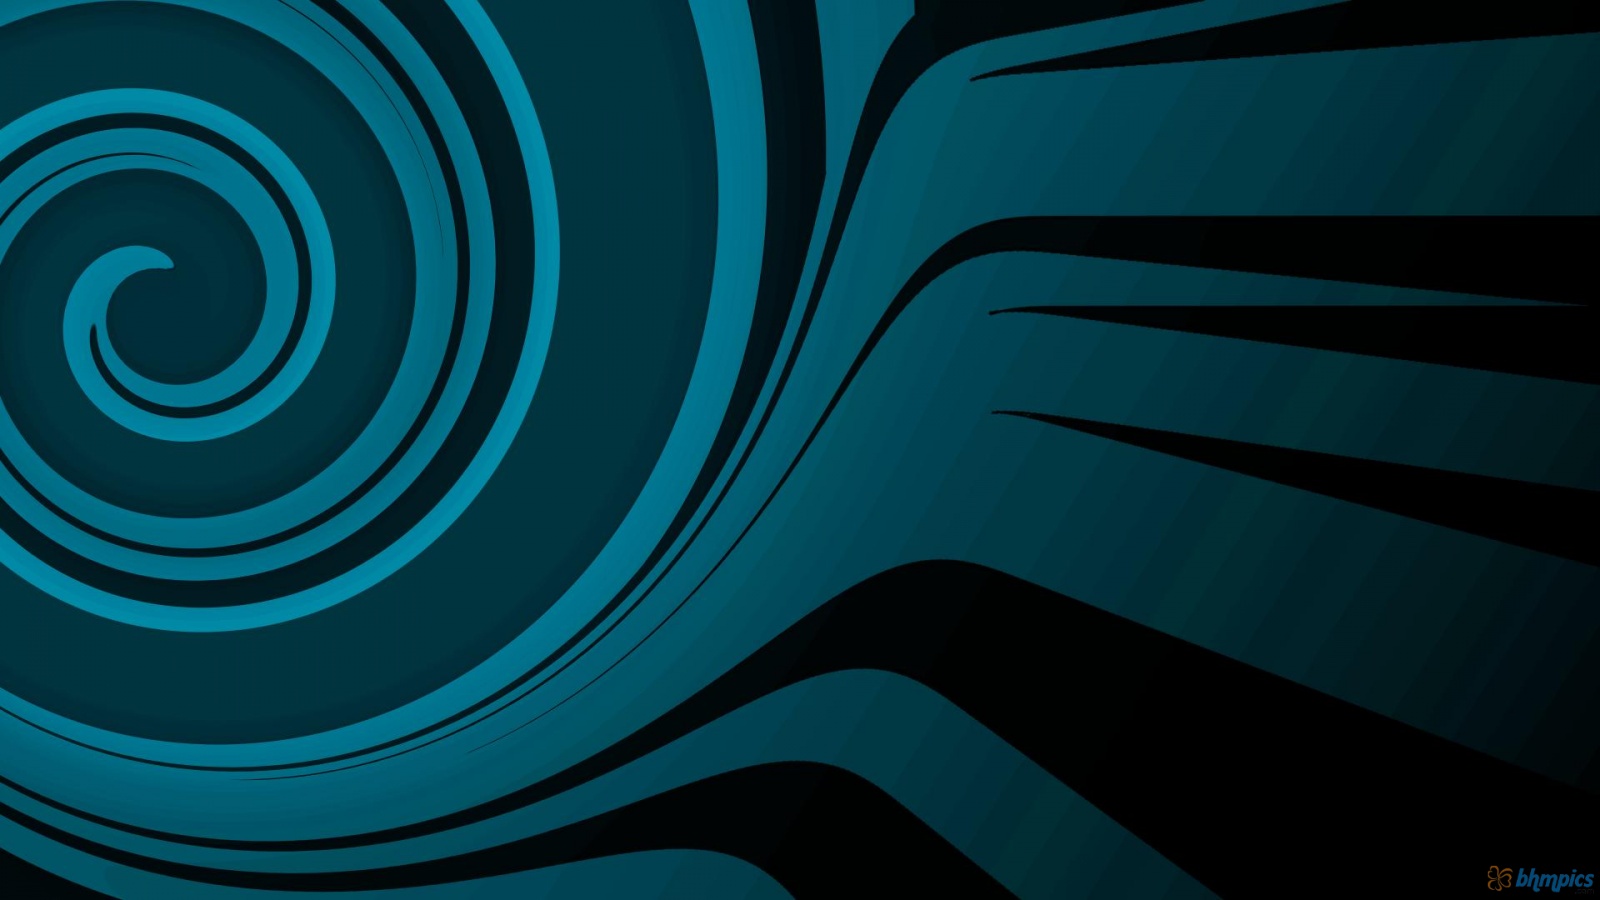 Blue And Black Abstract 1600x900 5896 HD Wallpaper Res 1600x900